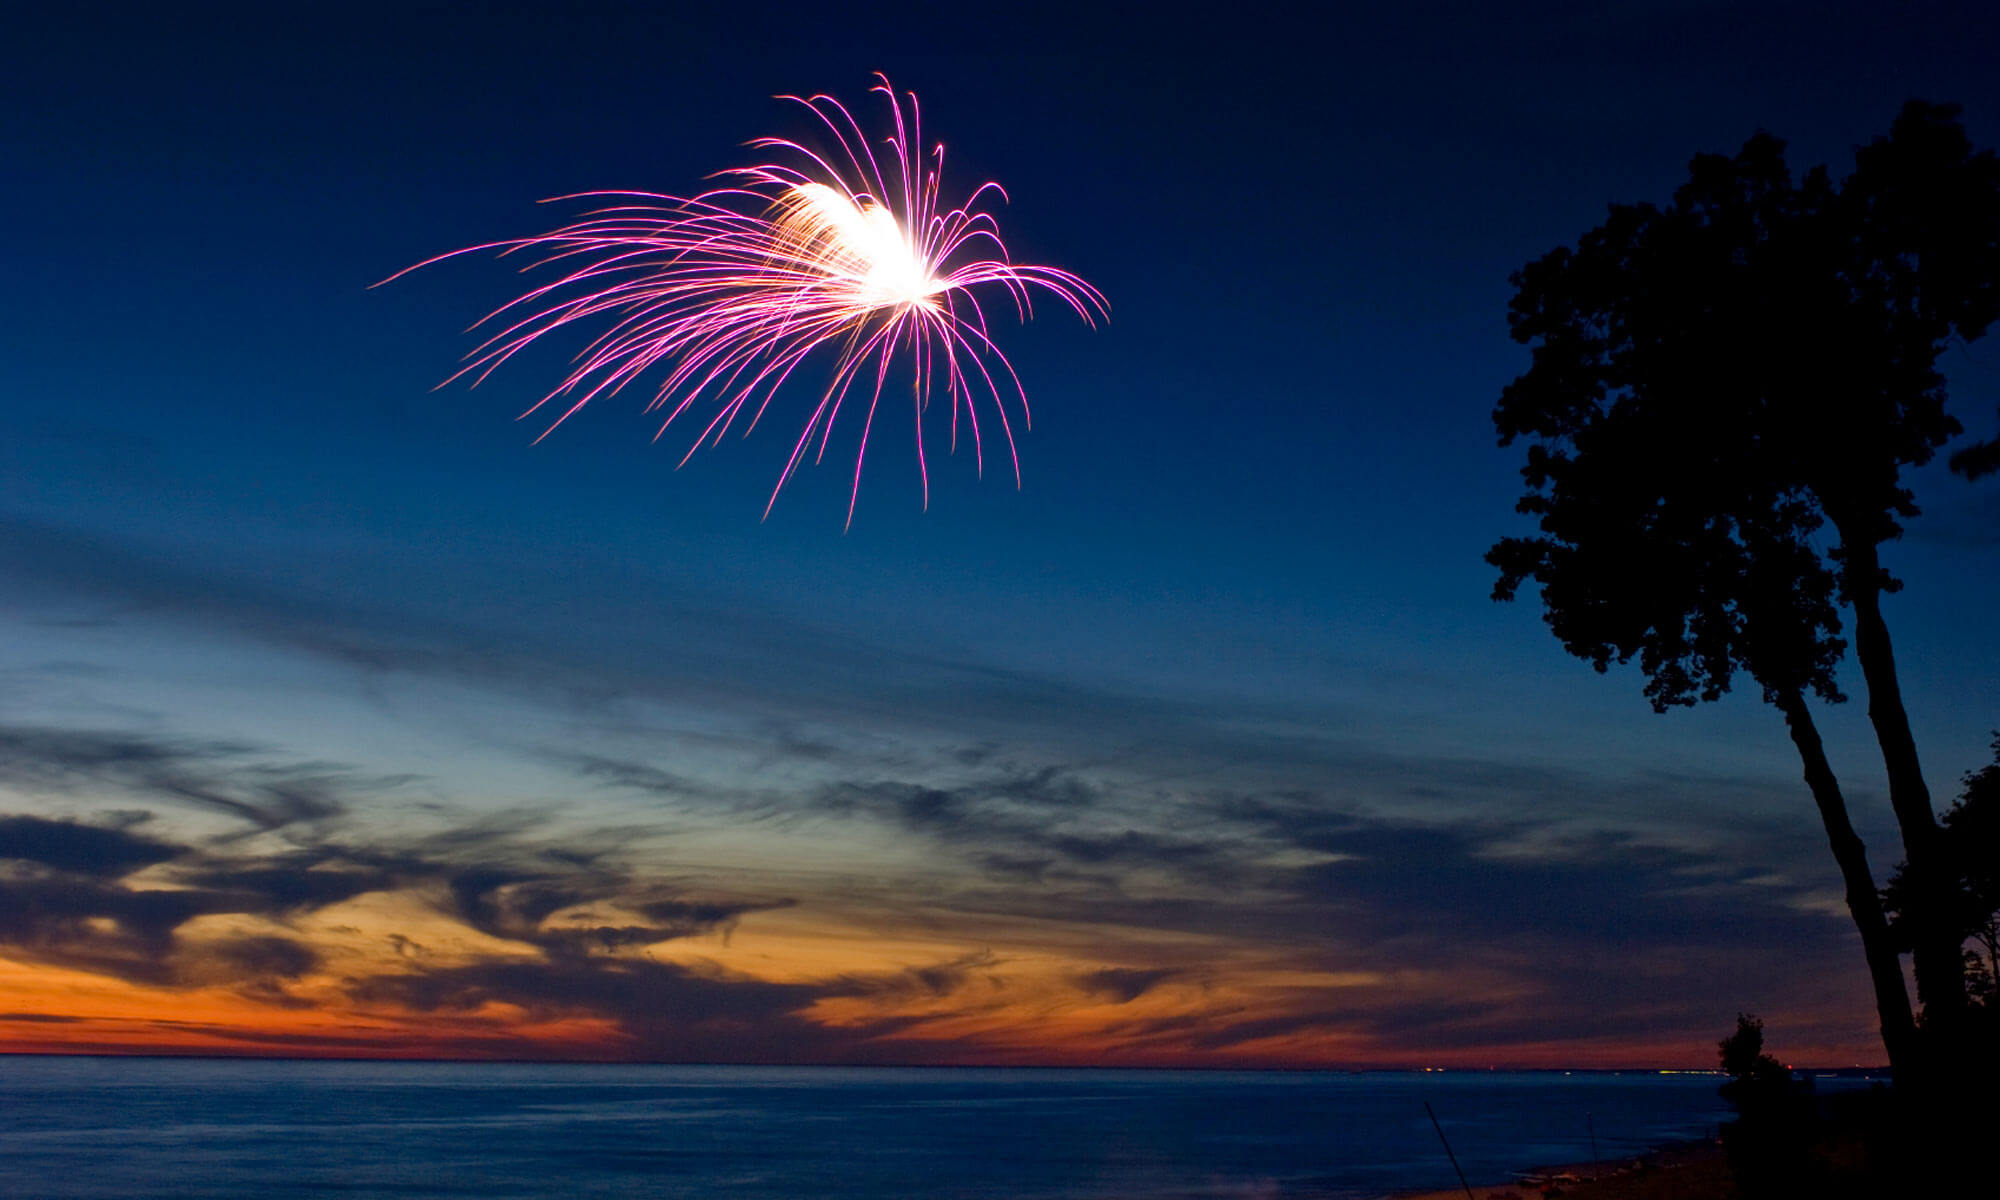 A very dramatic sunset and fireworks display off the coast of Key West, FL 